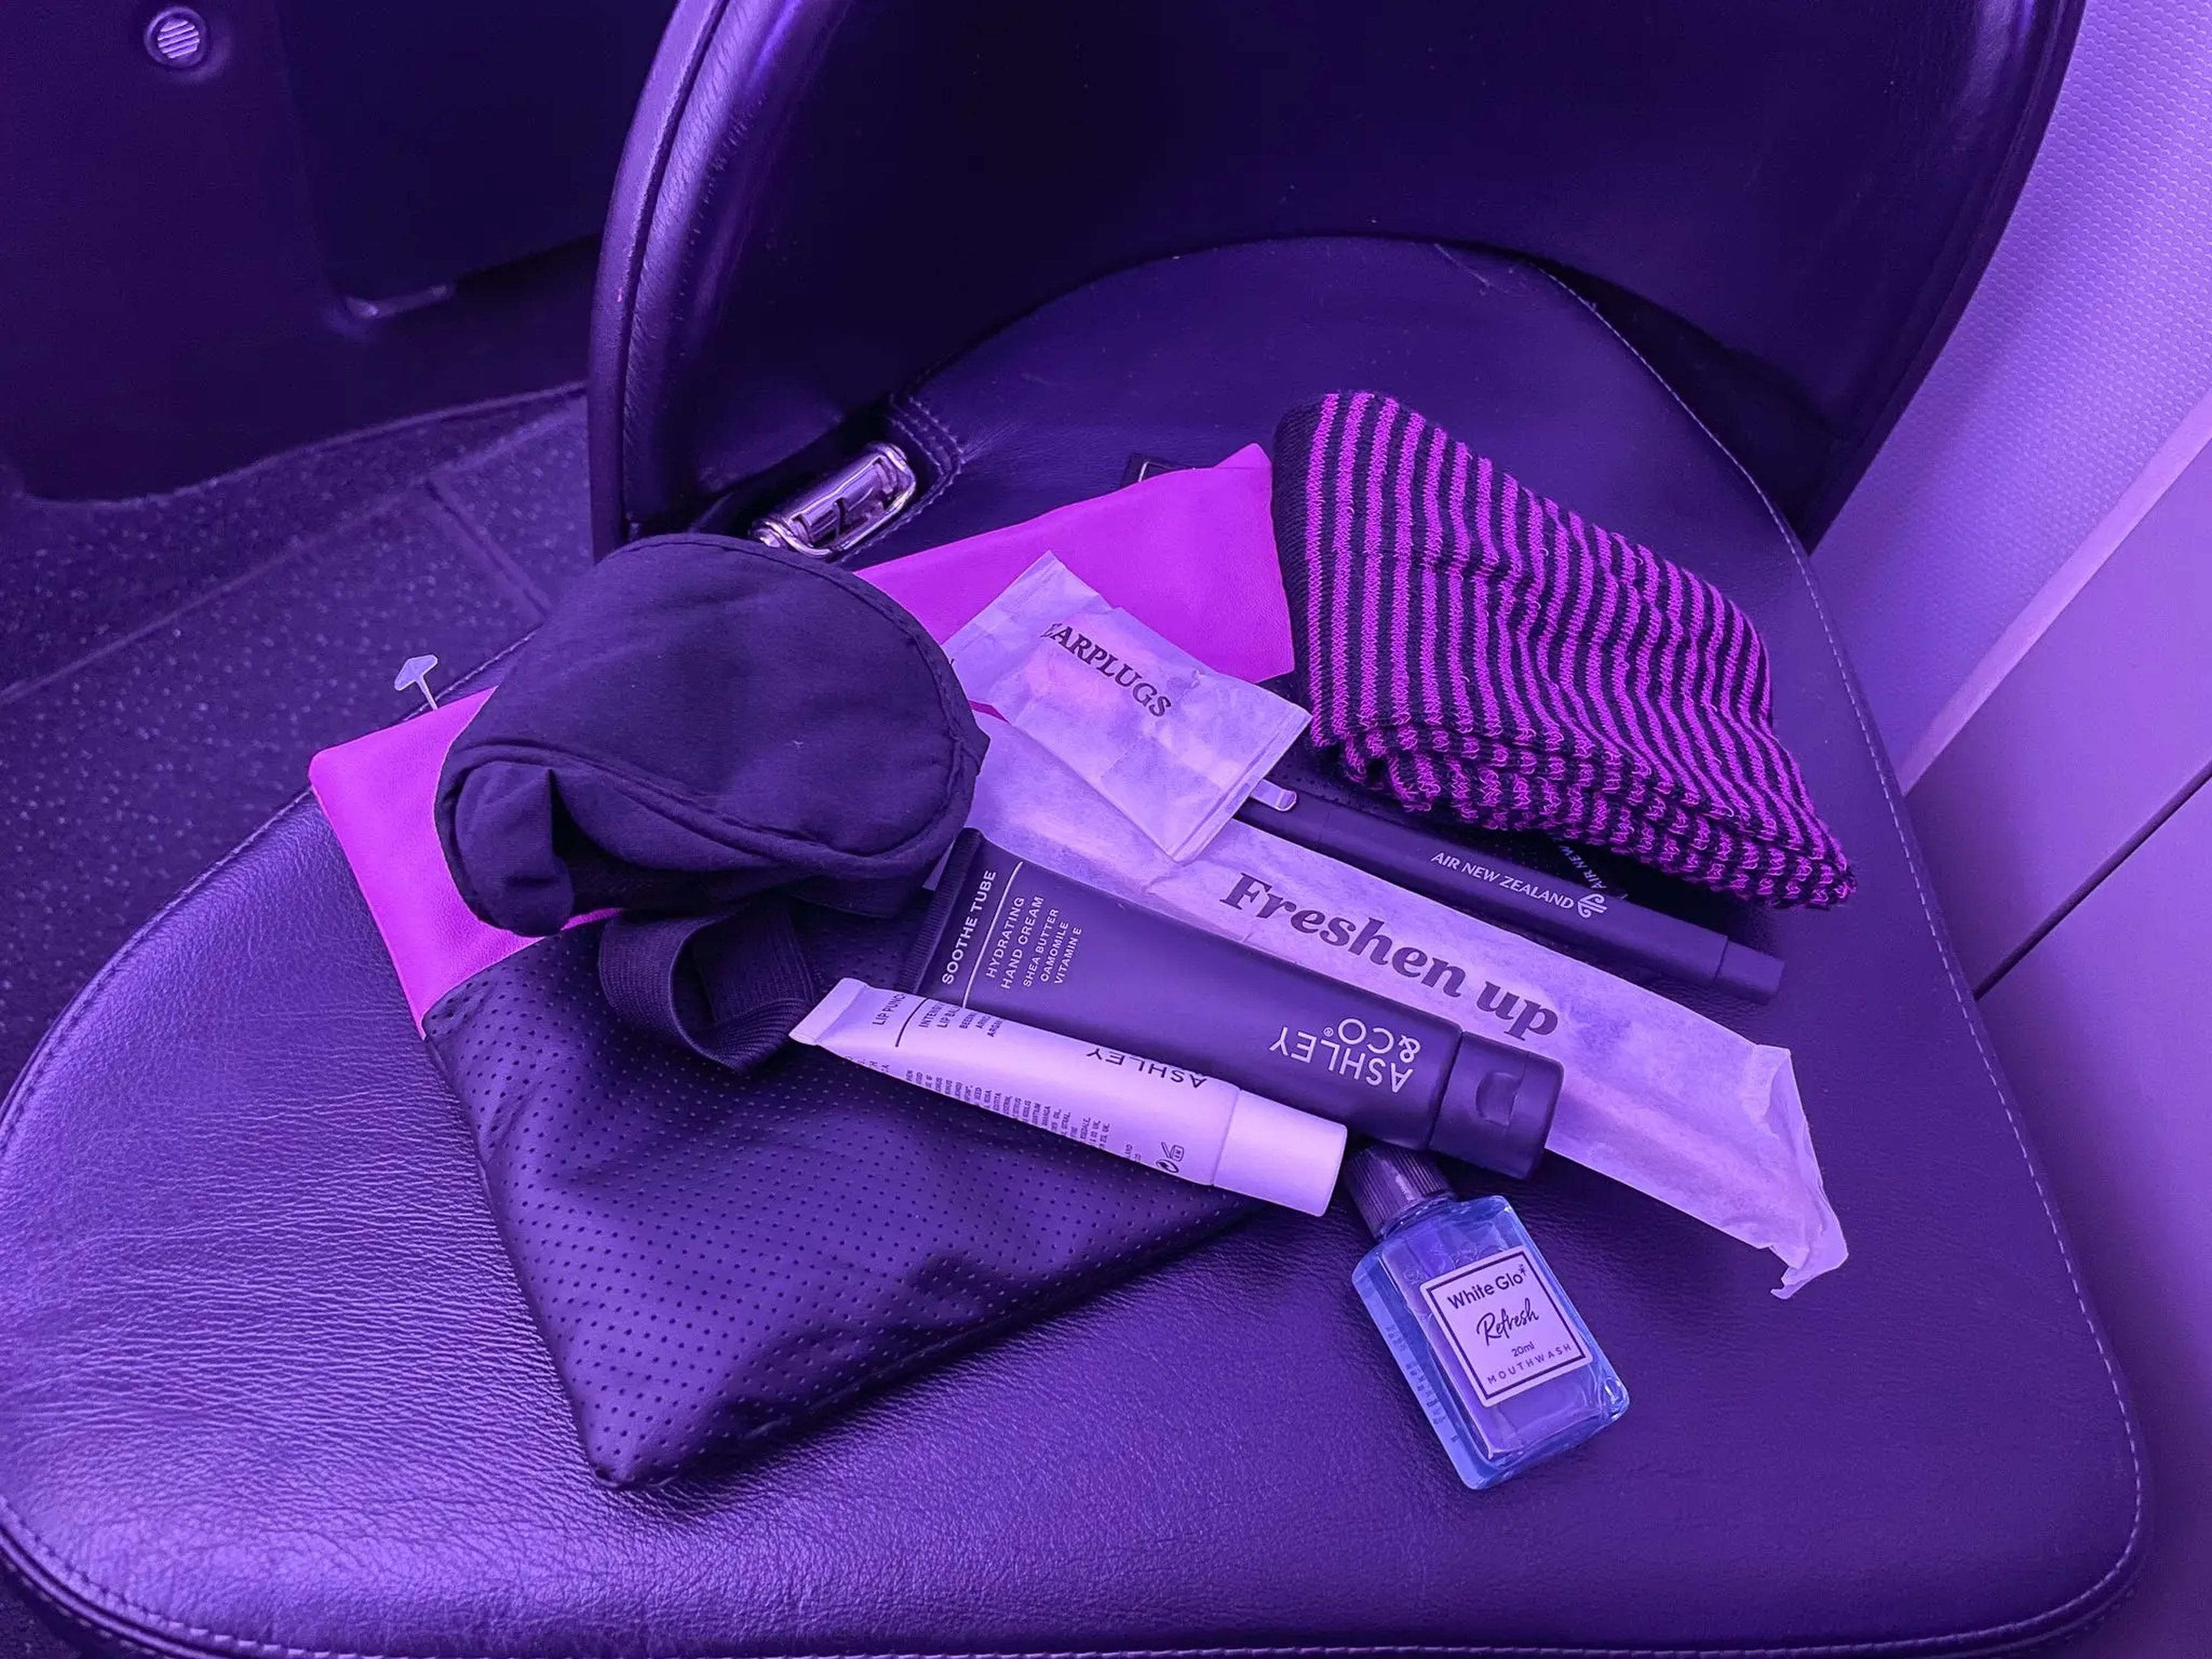 Each passenger received a bag of toiletries on the flight.